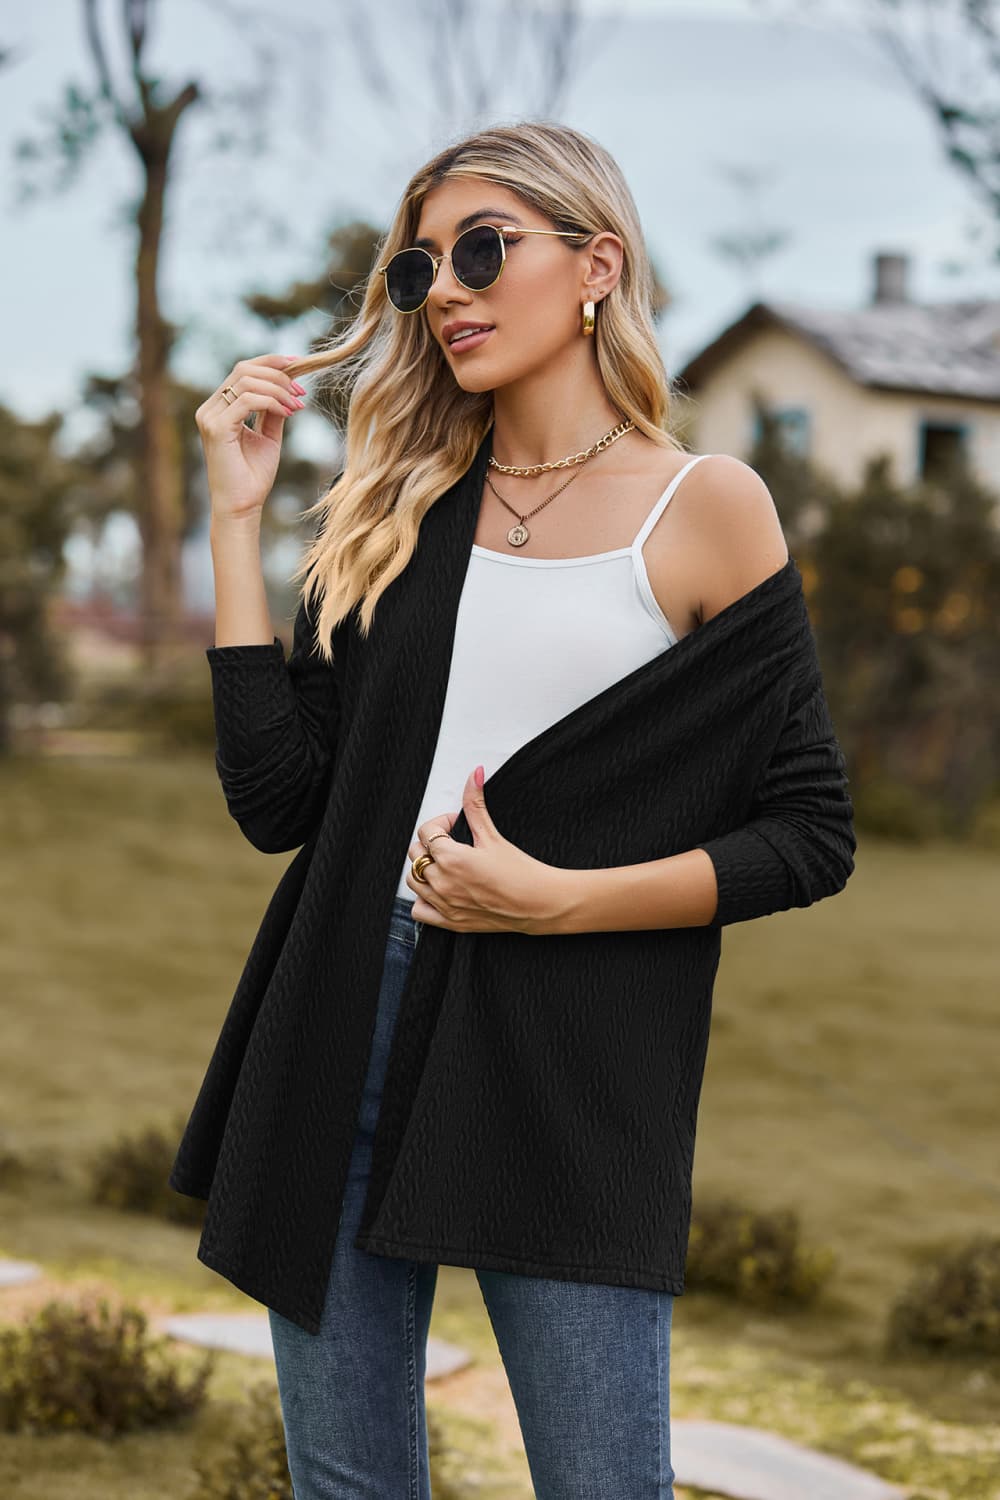 Open Front Long Sleeve Cardigan - Women’s Clothing & Accessories - Shirts & Tops - 8 - 2024